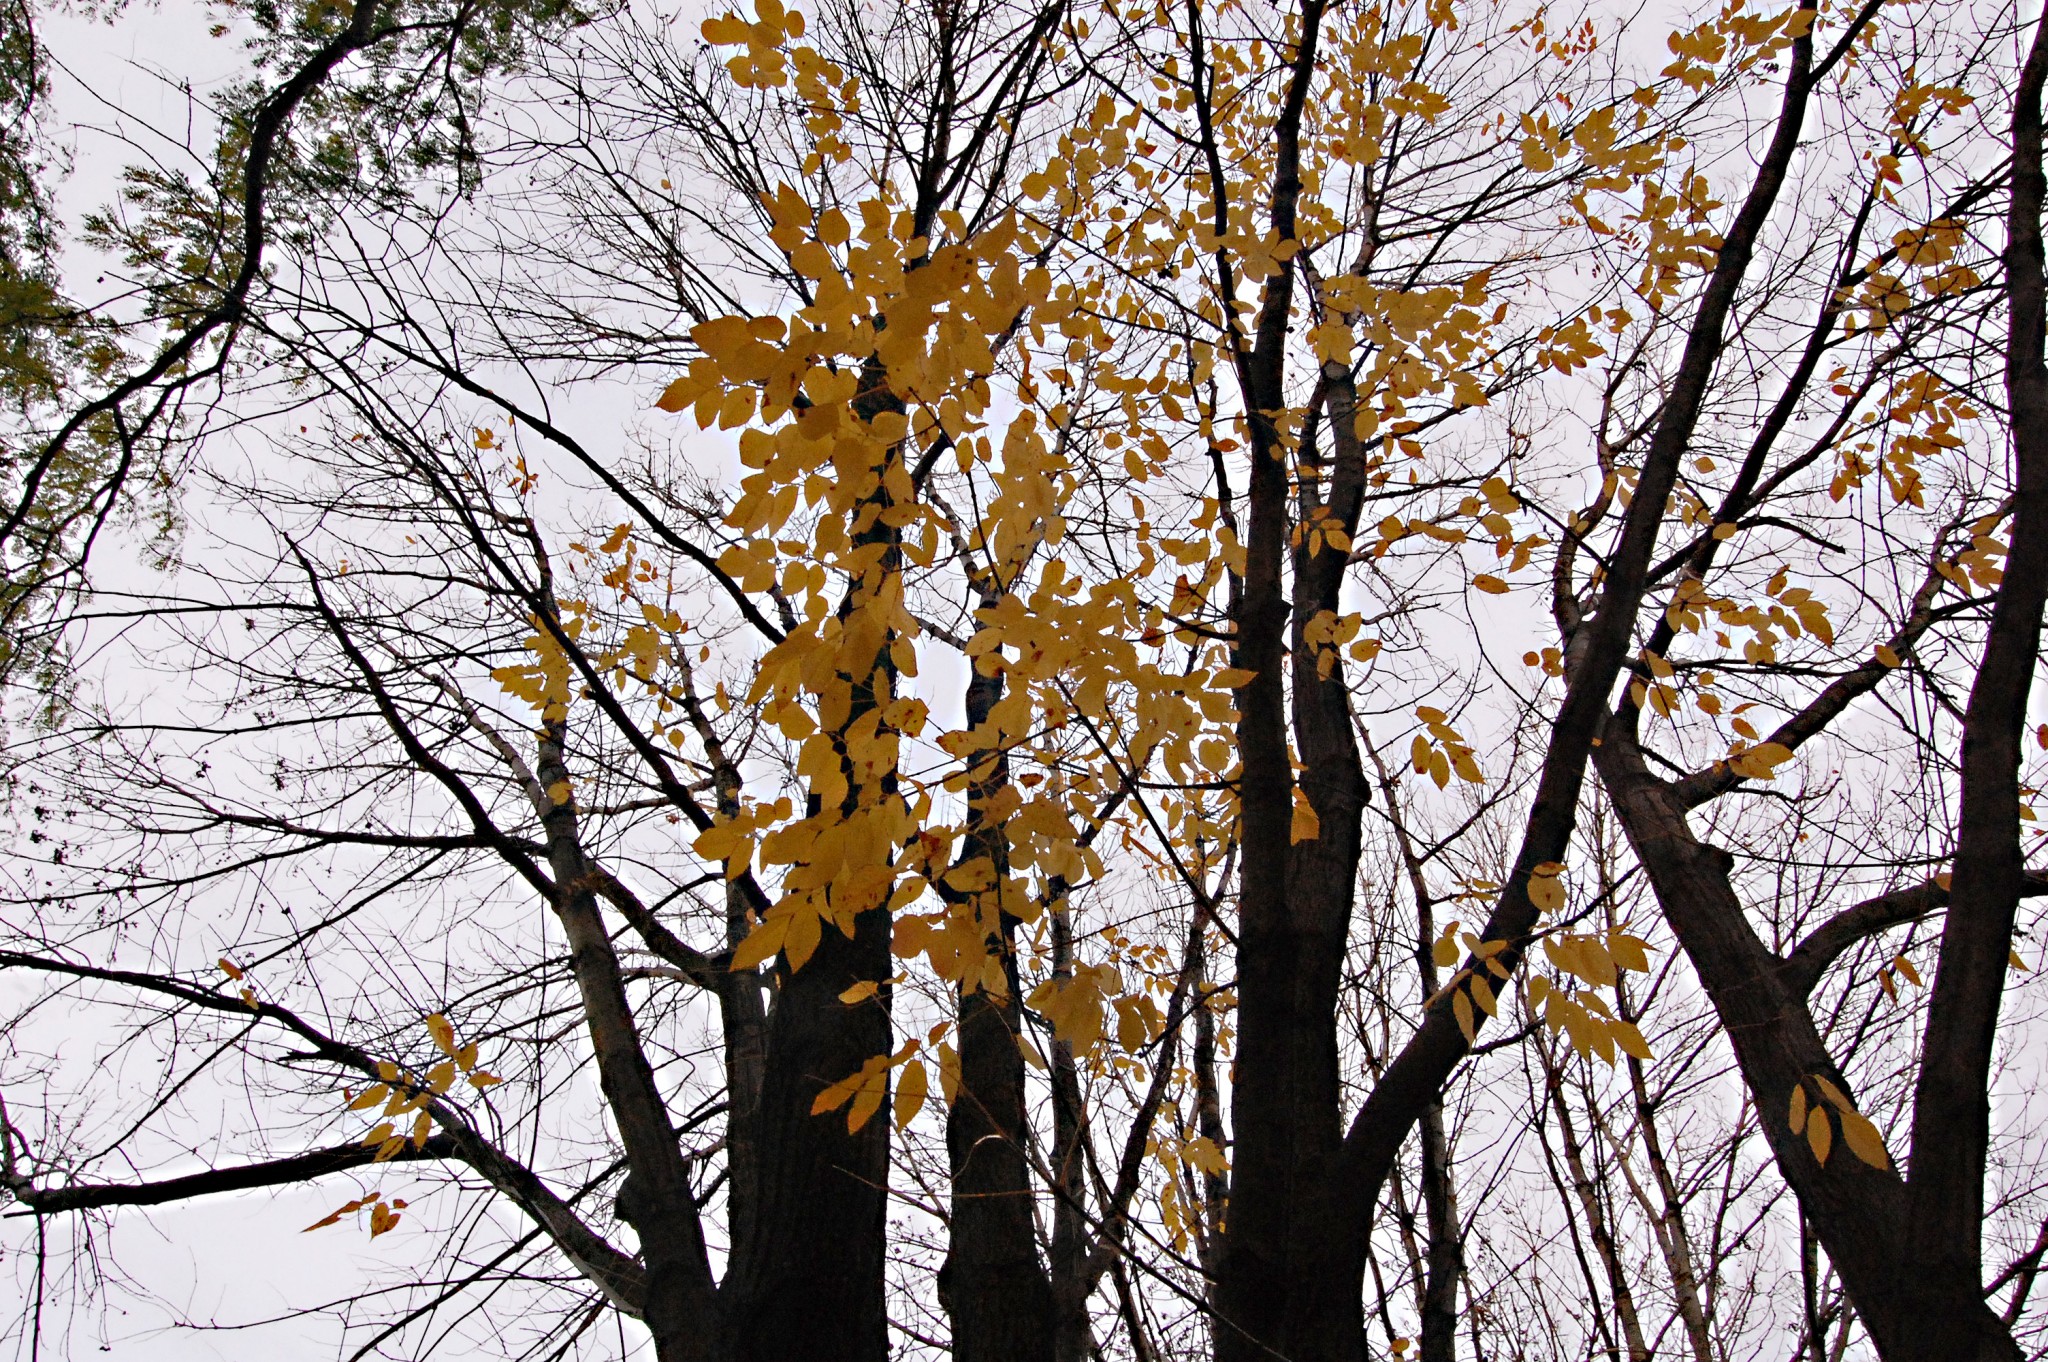 A phalanx of small orange leaves cling to a spindly array of otherwise bare branches.